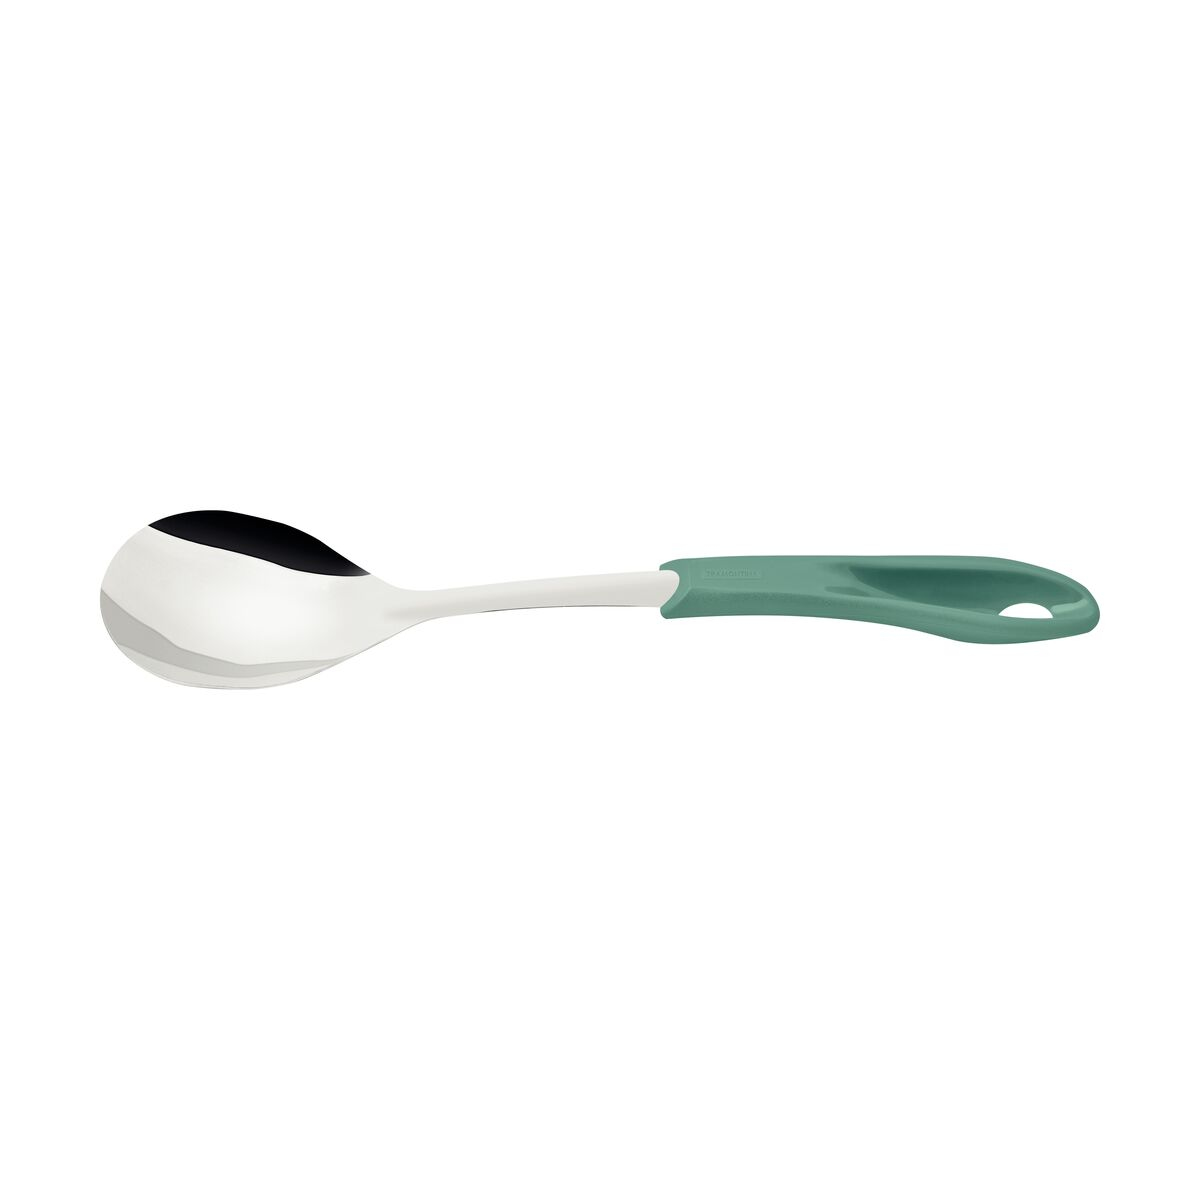 Tramontina Fluence Serving Spoon with Stainless Steel Blade and Mint Polypropylene Handle